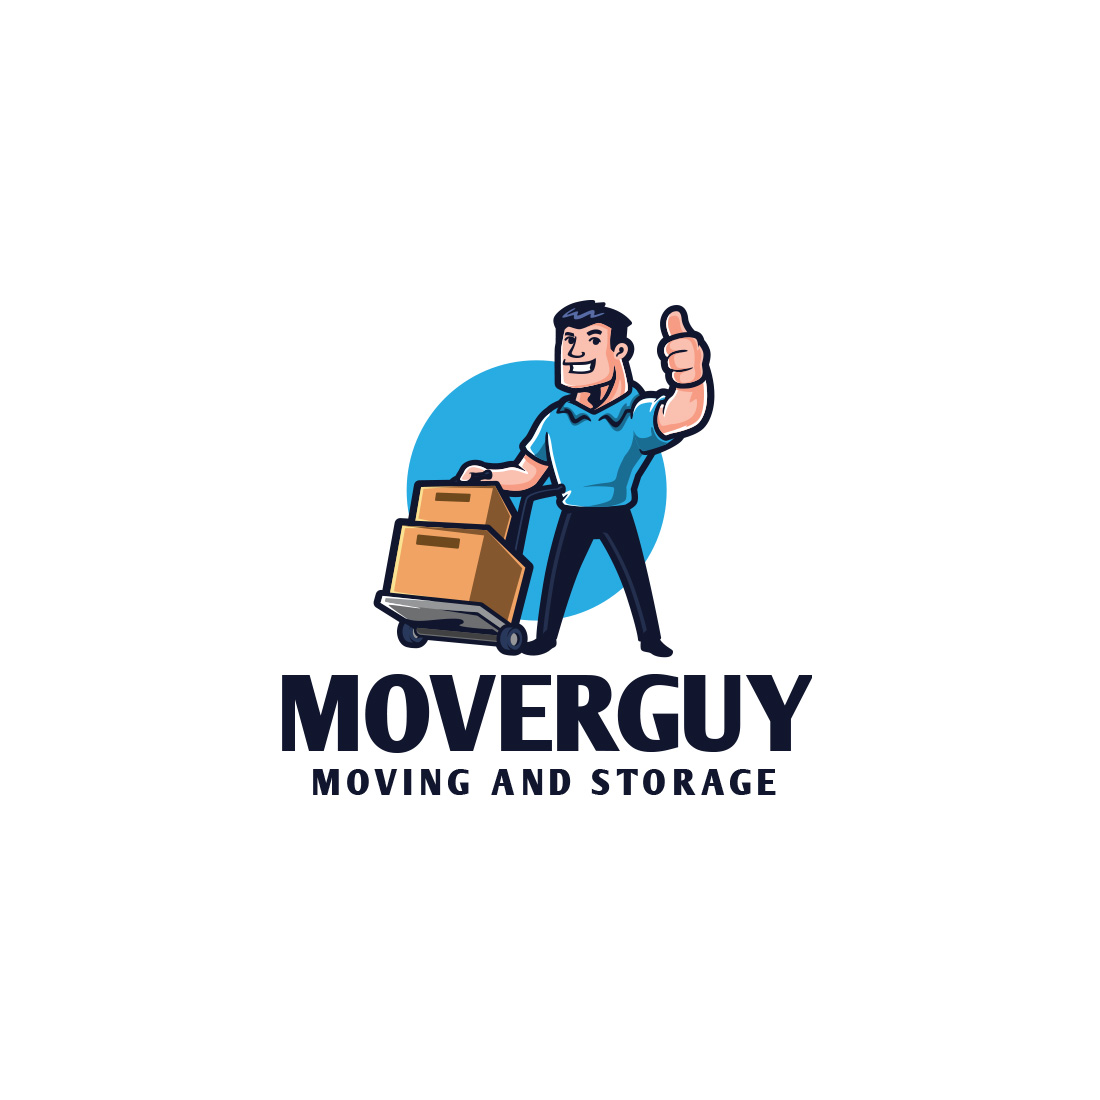 Mover Guy Character Mascot Logo cover image.